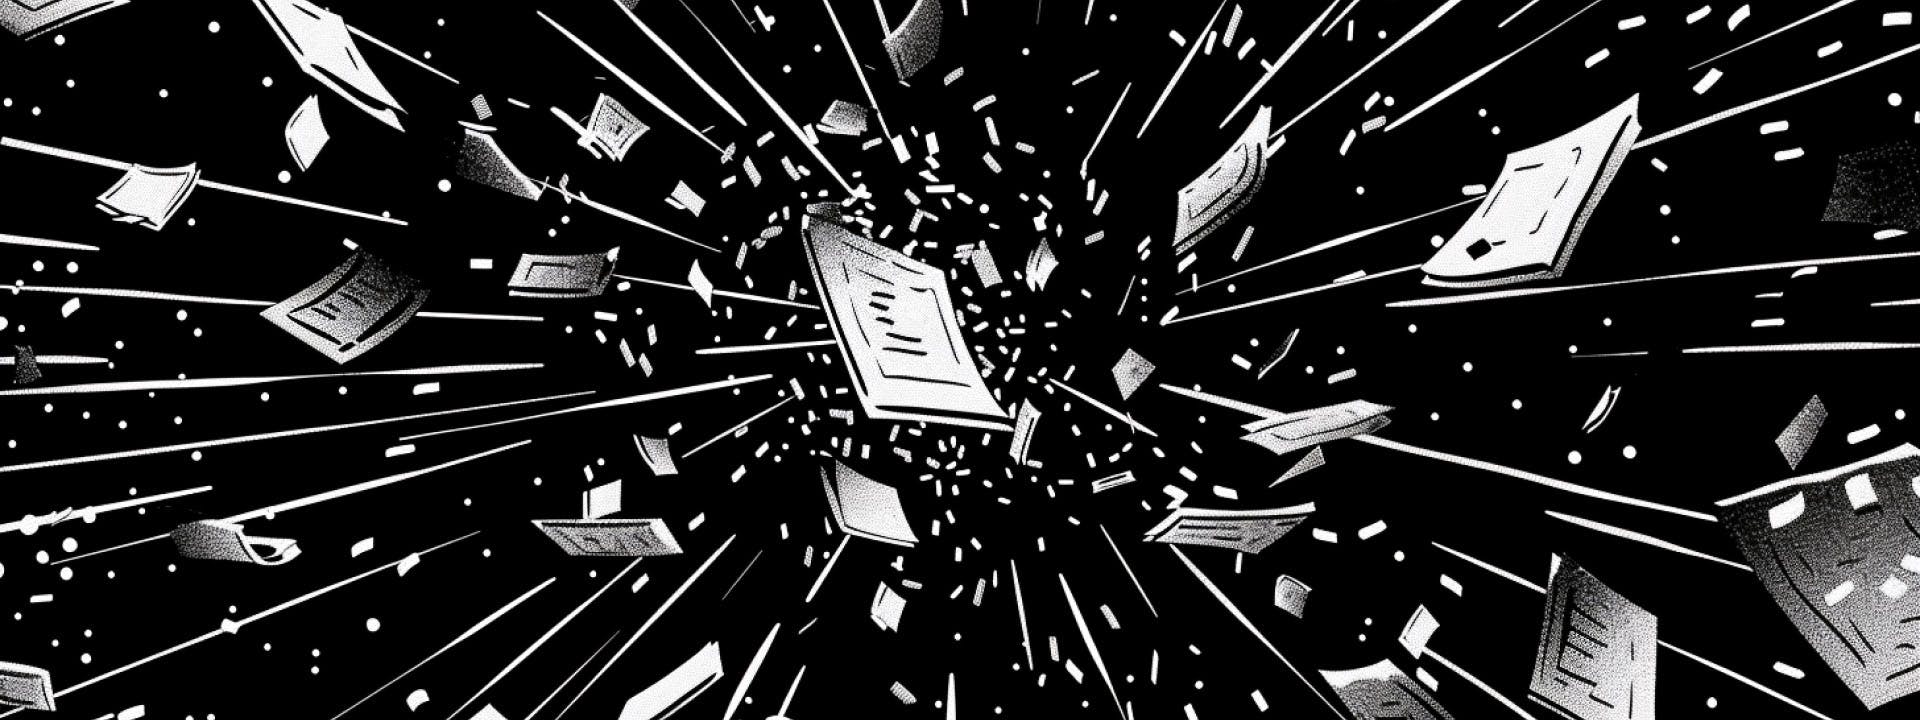 Illustration of an exploding book, symbolizing the complexity of information users navigate and the importance of clear design in user experience